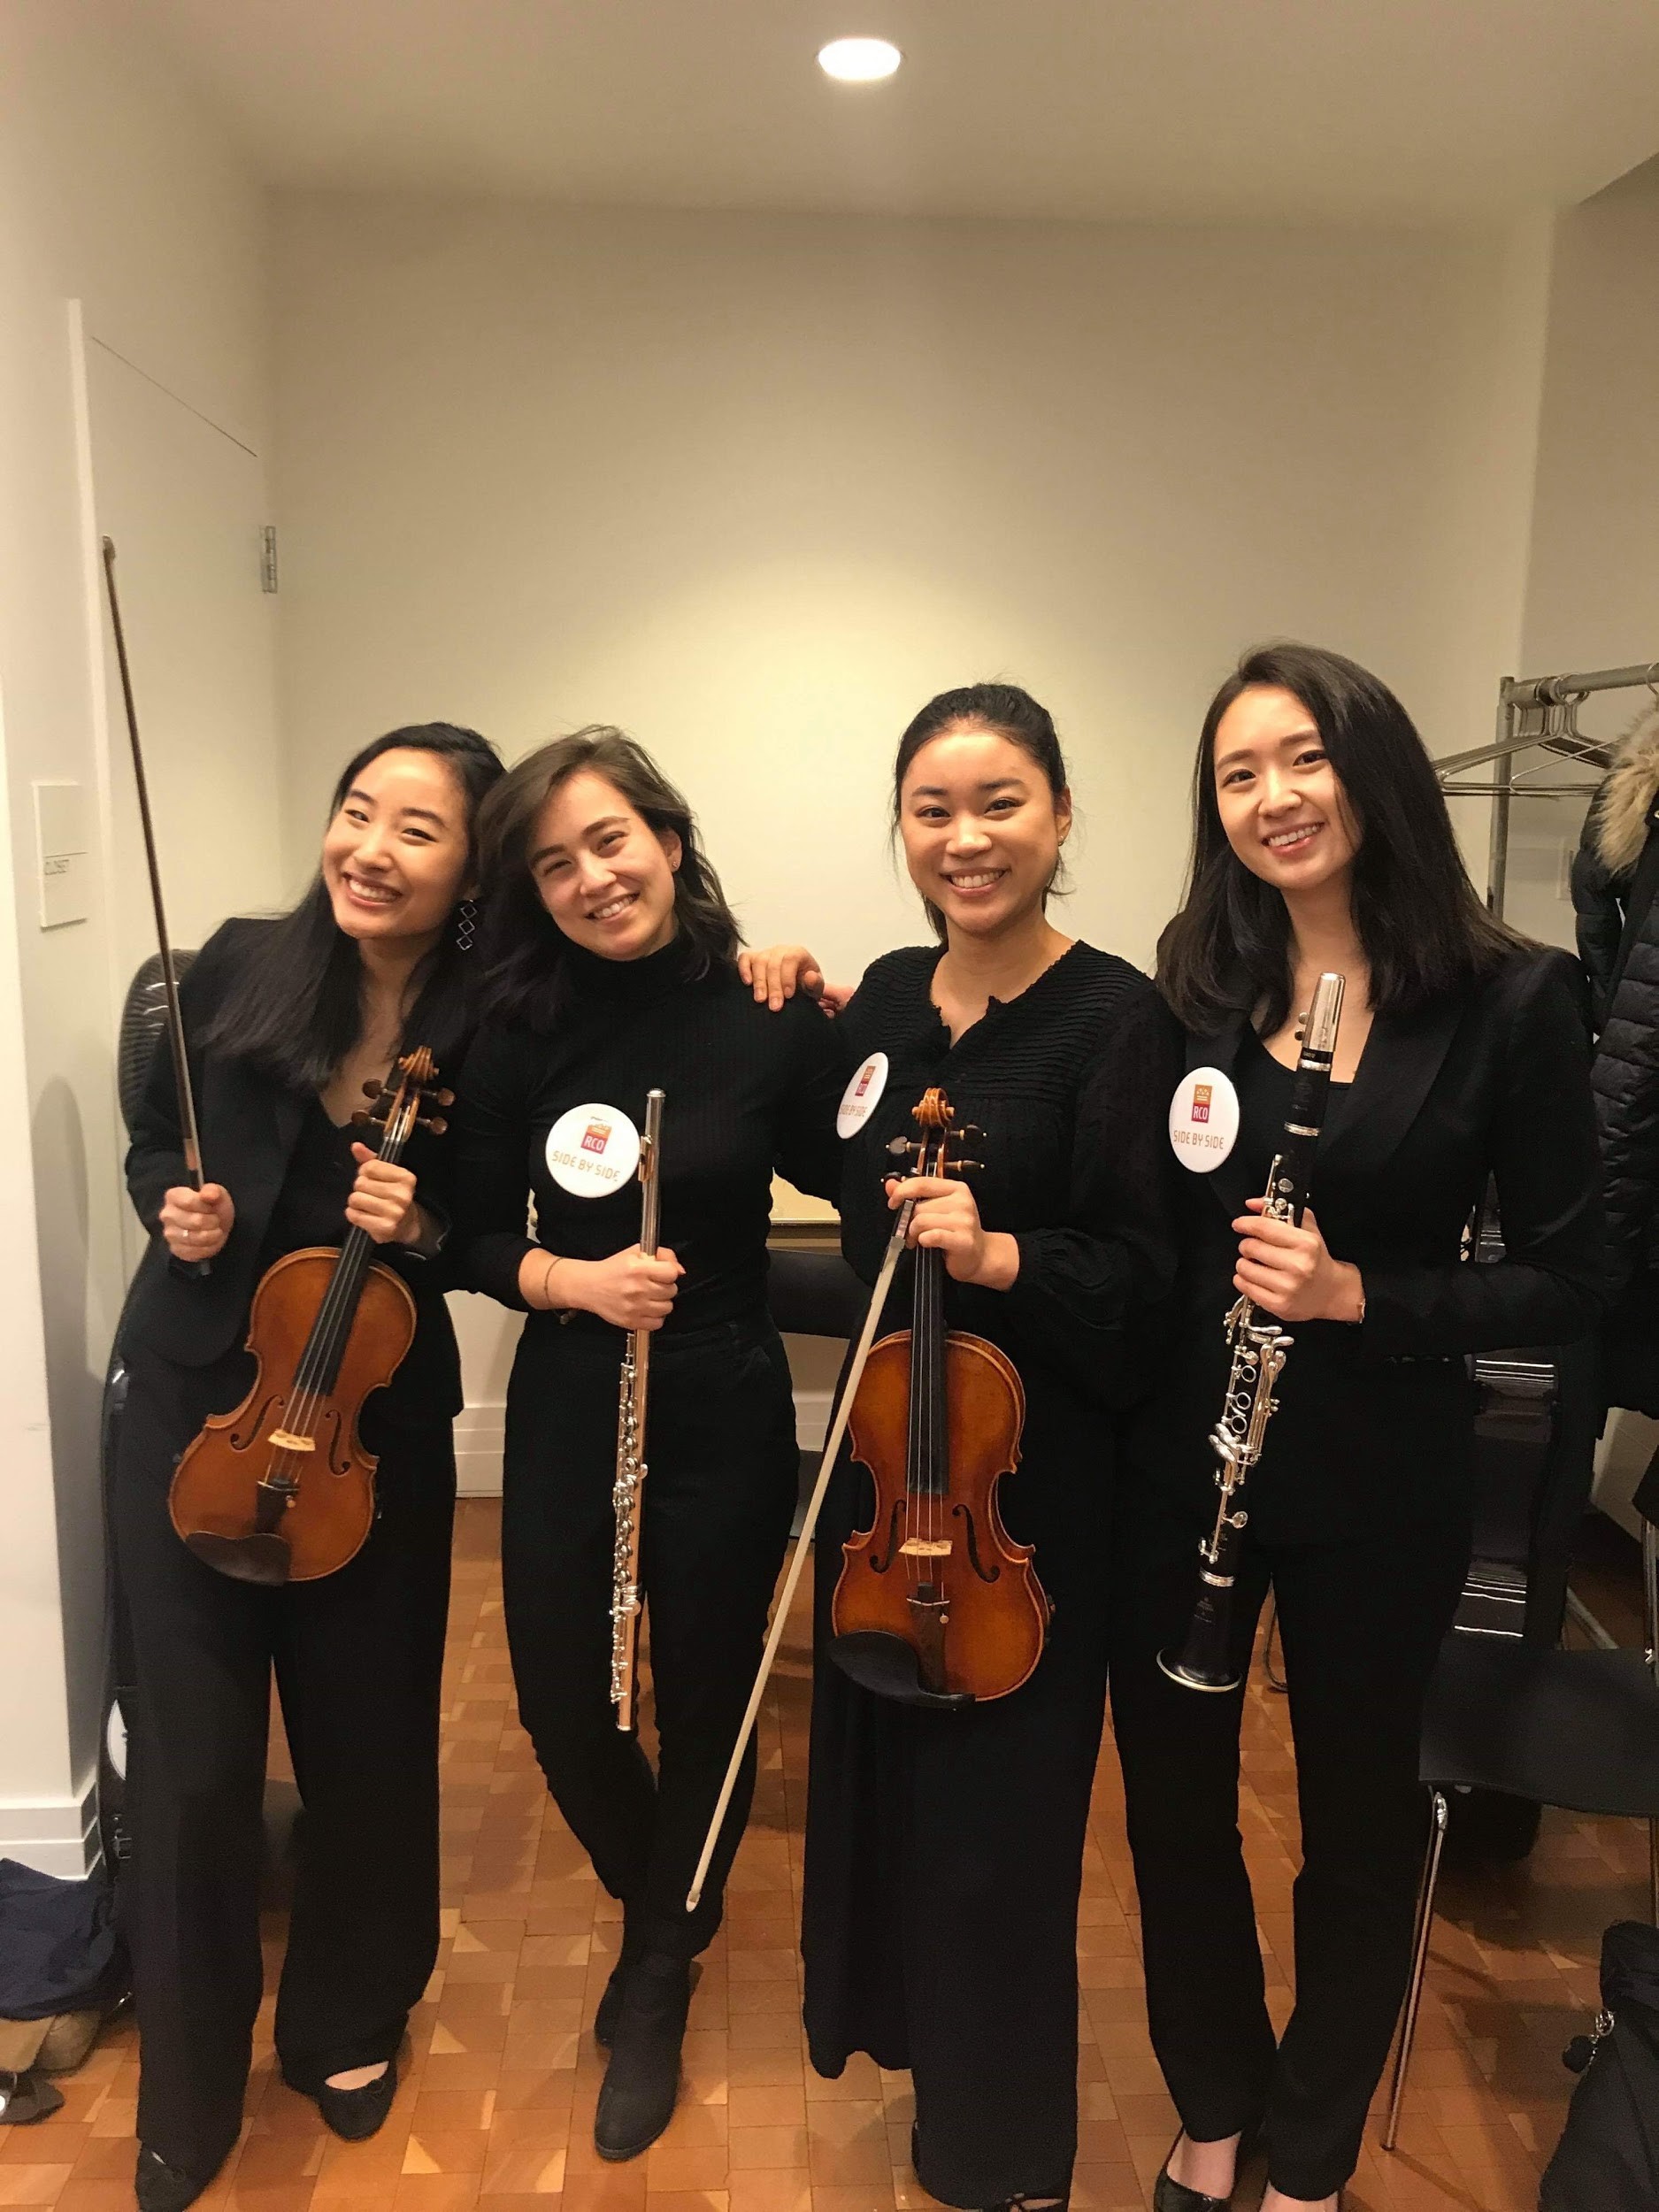 Mei poses with other musicians before a performance